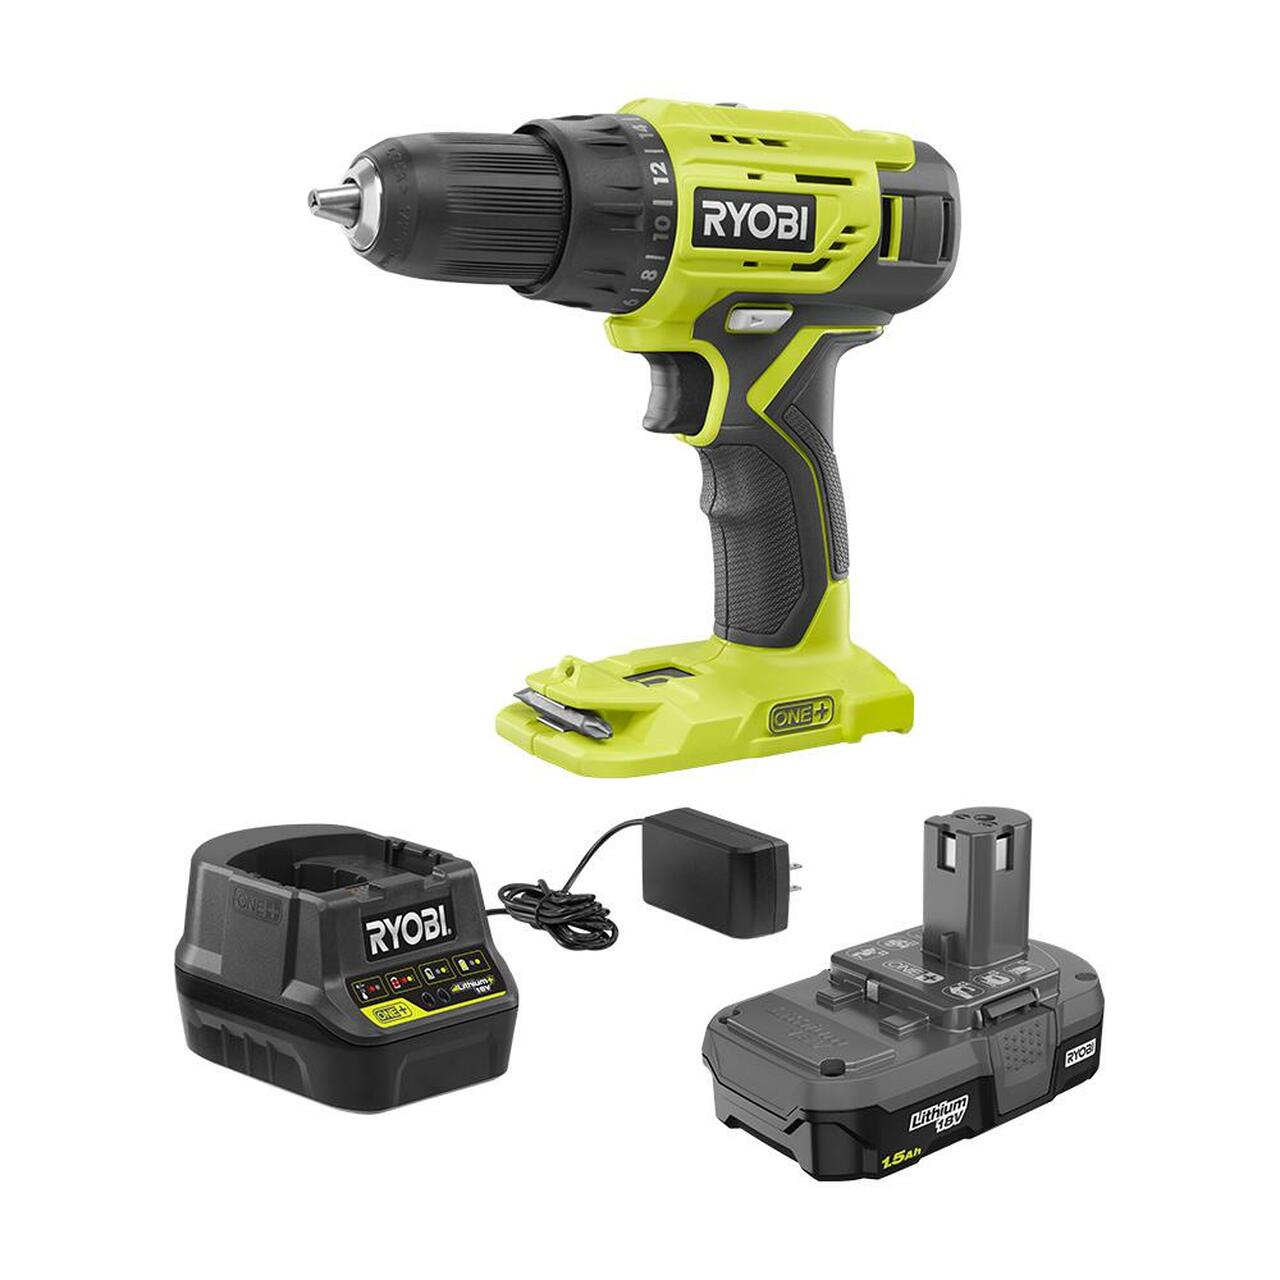 Ryobi p215k1 18v one+ lithium-ion cordless 1/2 in. Drill/driver kit - fs $34.99 at Secondipity